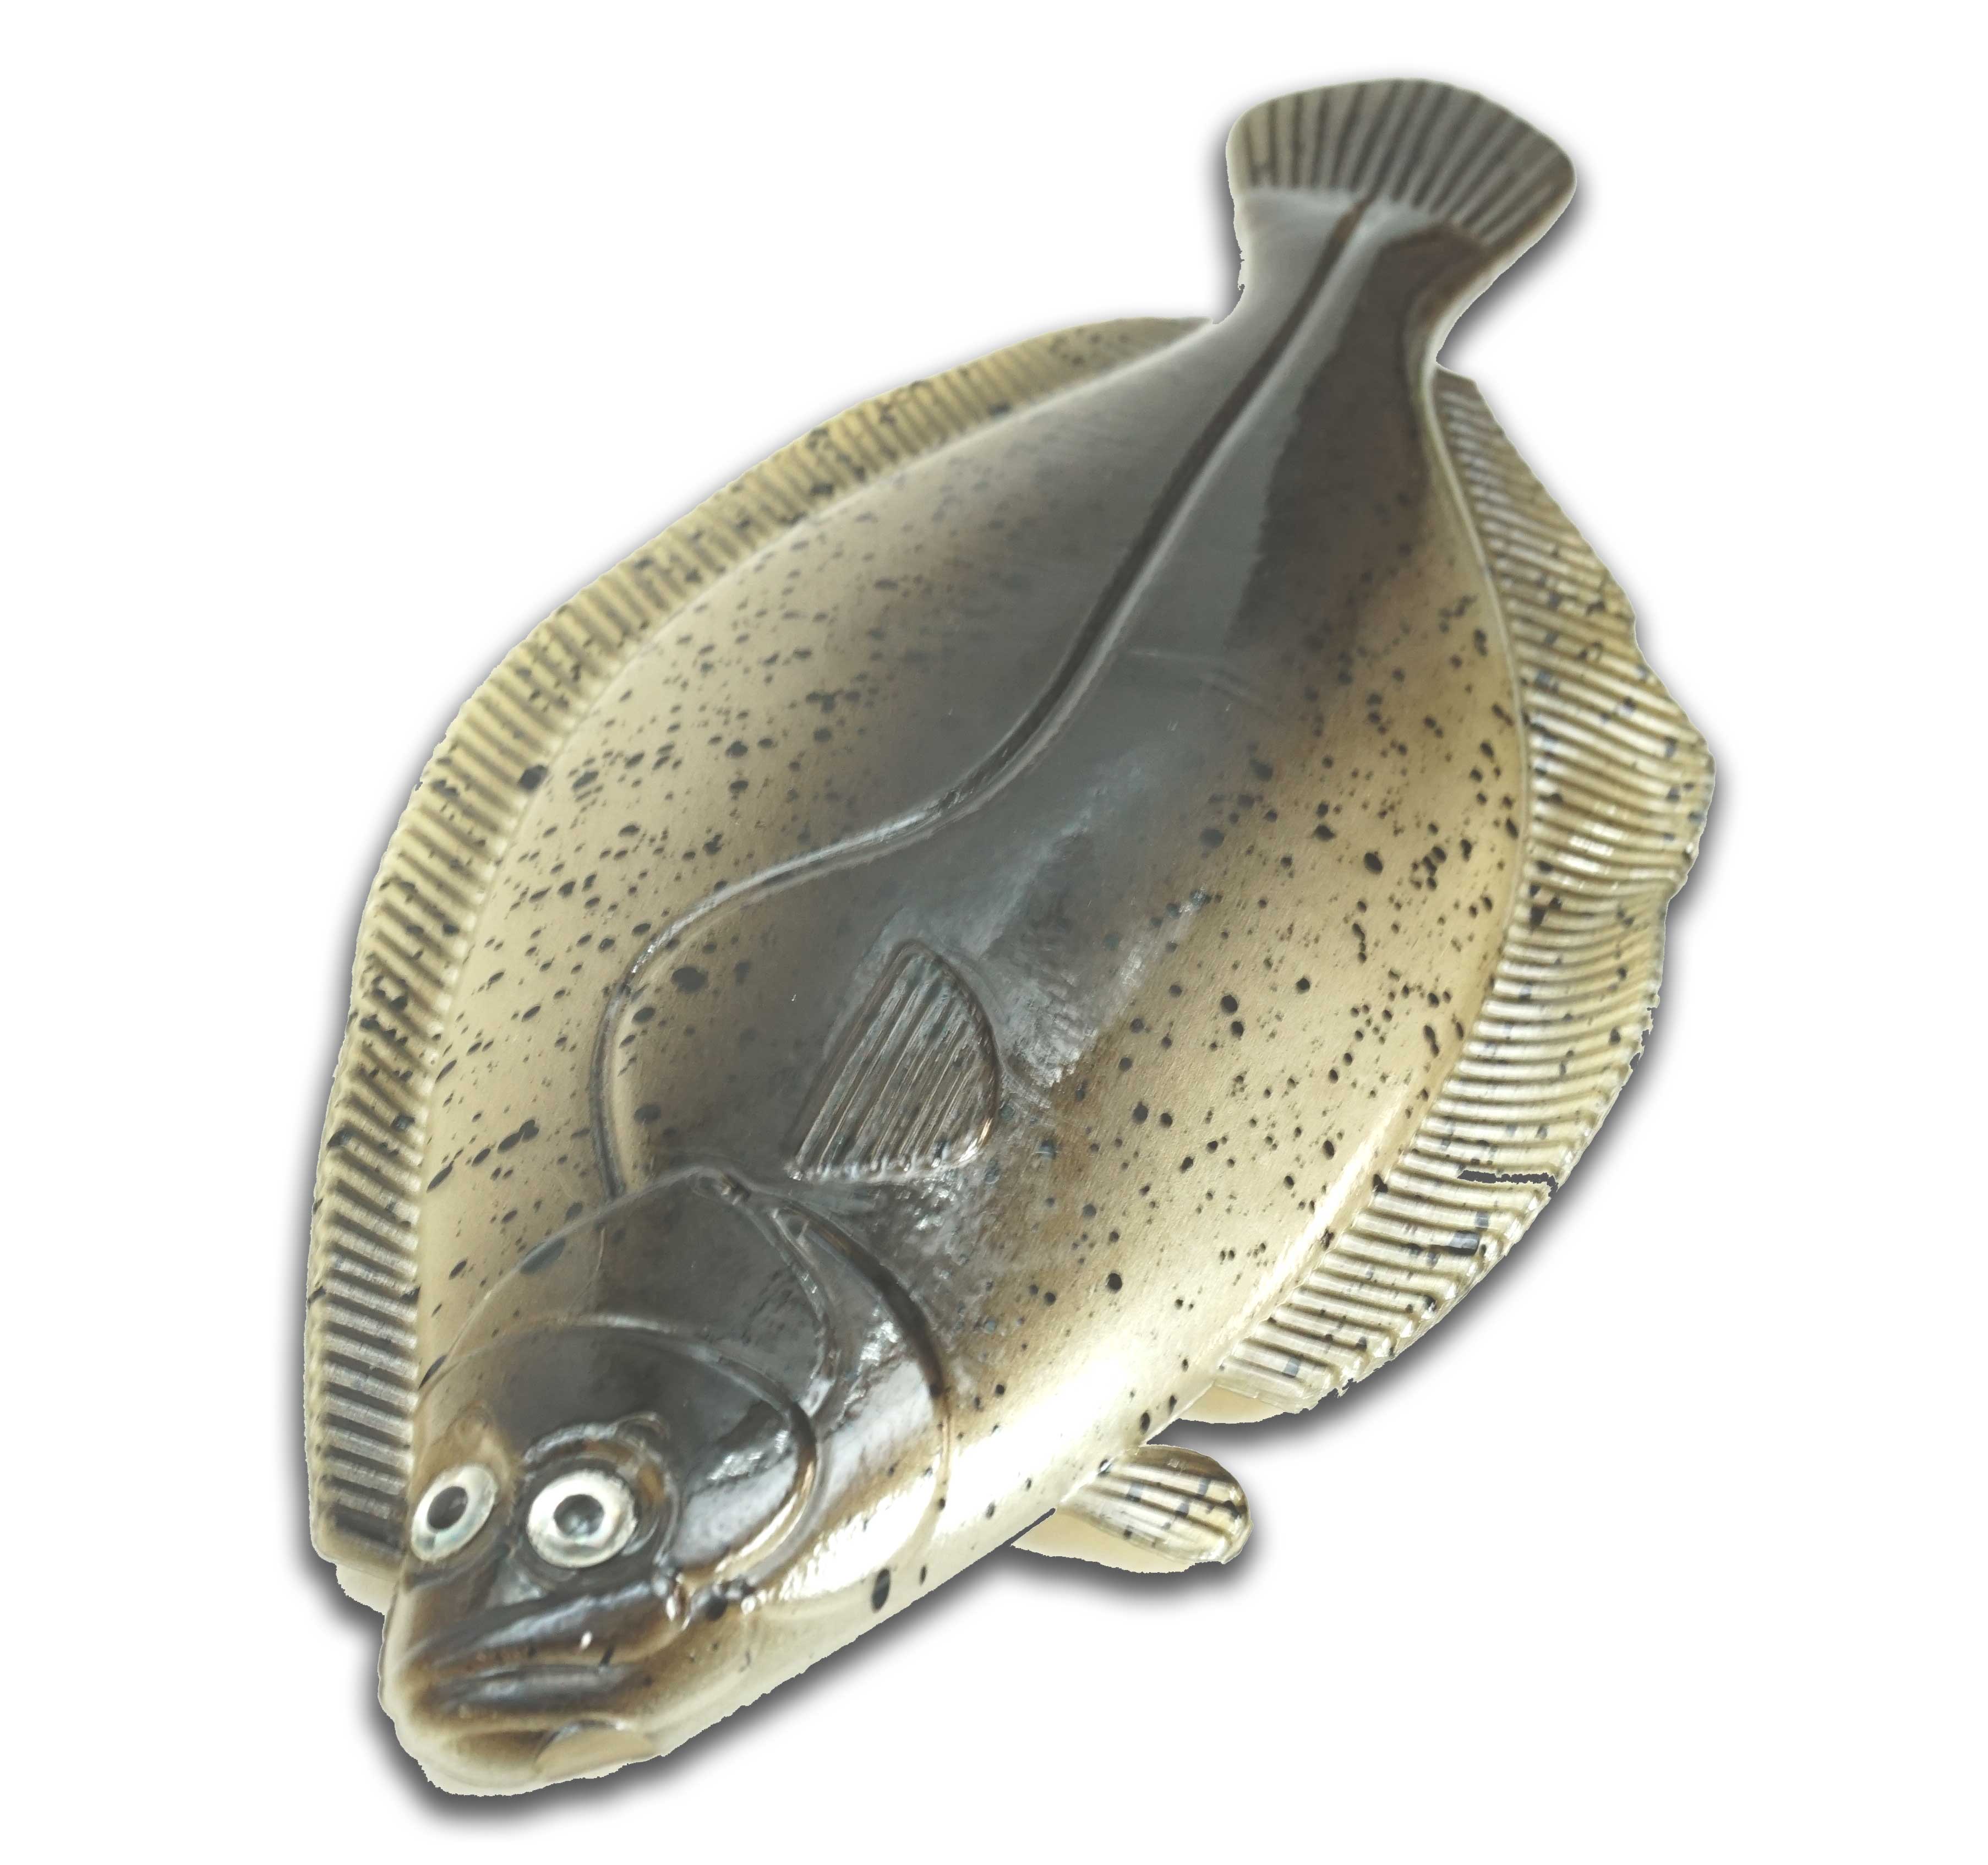 Artificial Flounder 6 Light Spotted - Almost Alive Lures Artificial Flounder  3-3/4 Light Spotted AAFL-7 $2.99 [AAFL-7] - $2.99 : Almost Alive Lures,  The best there ever was.